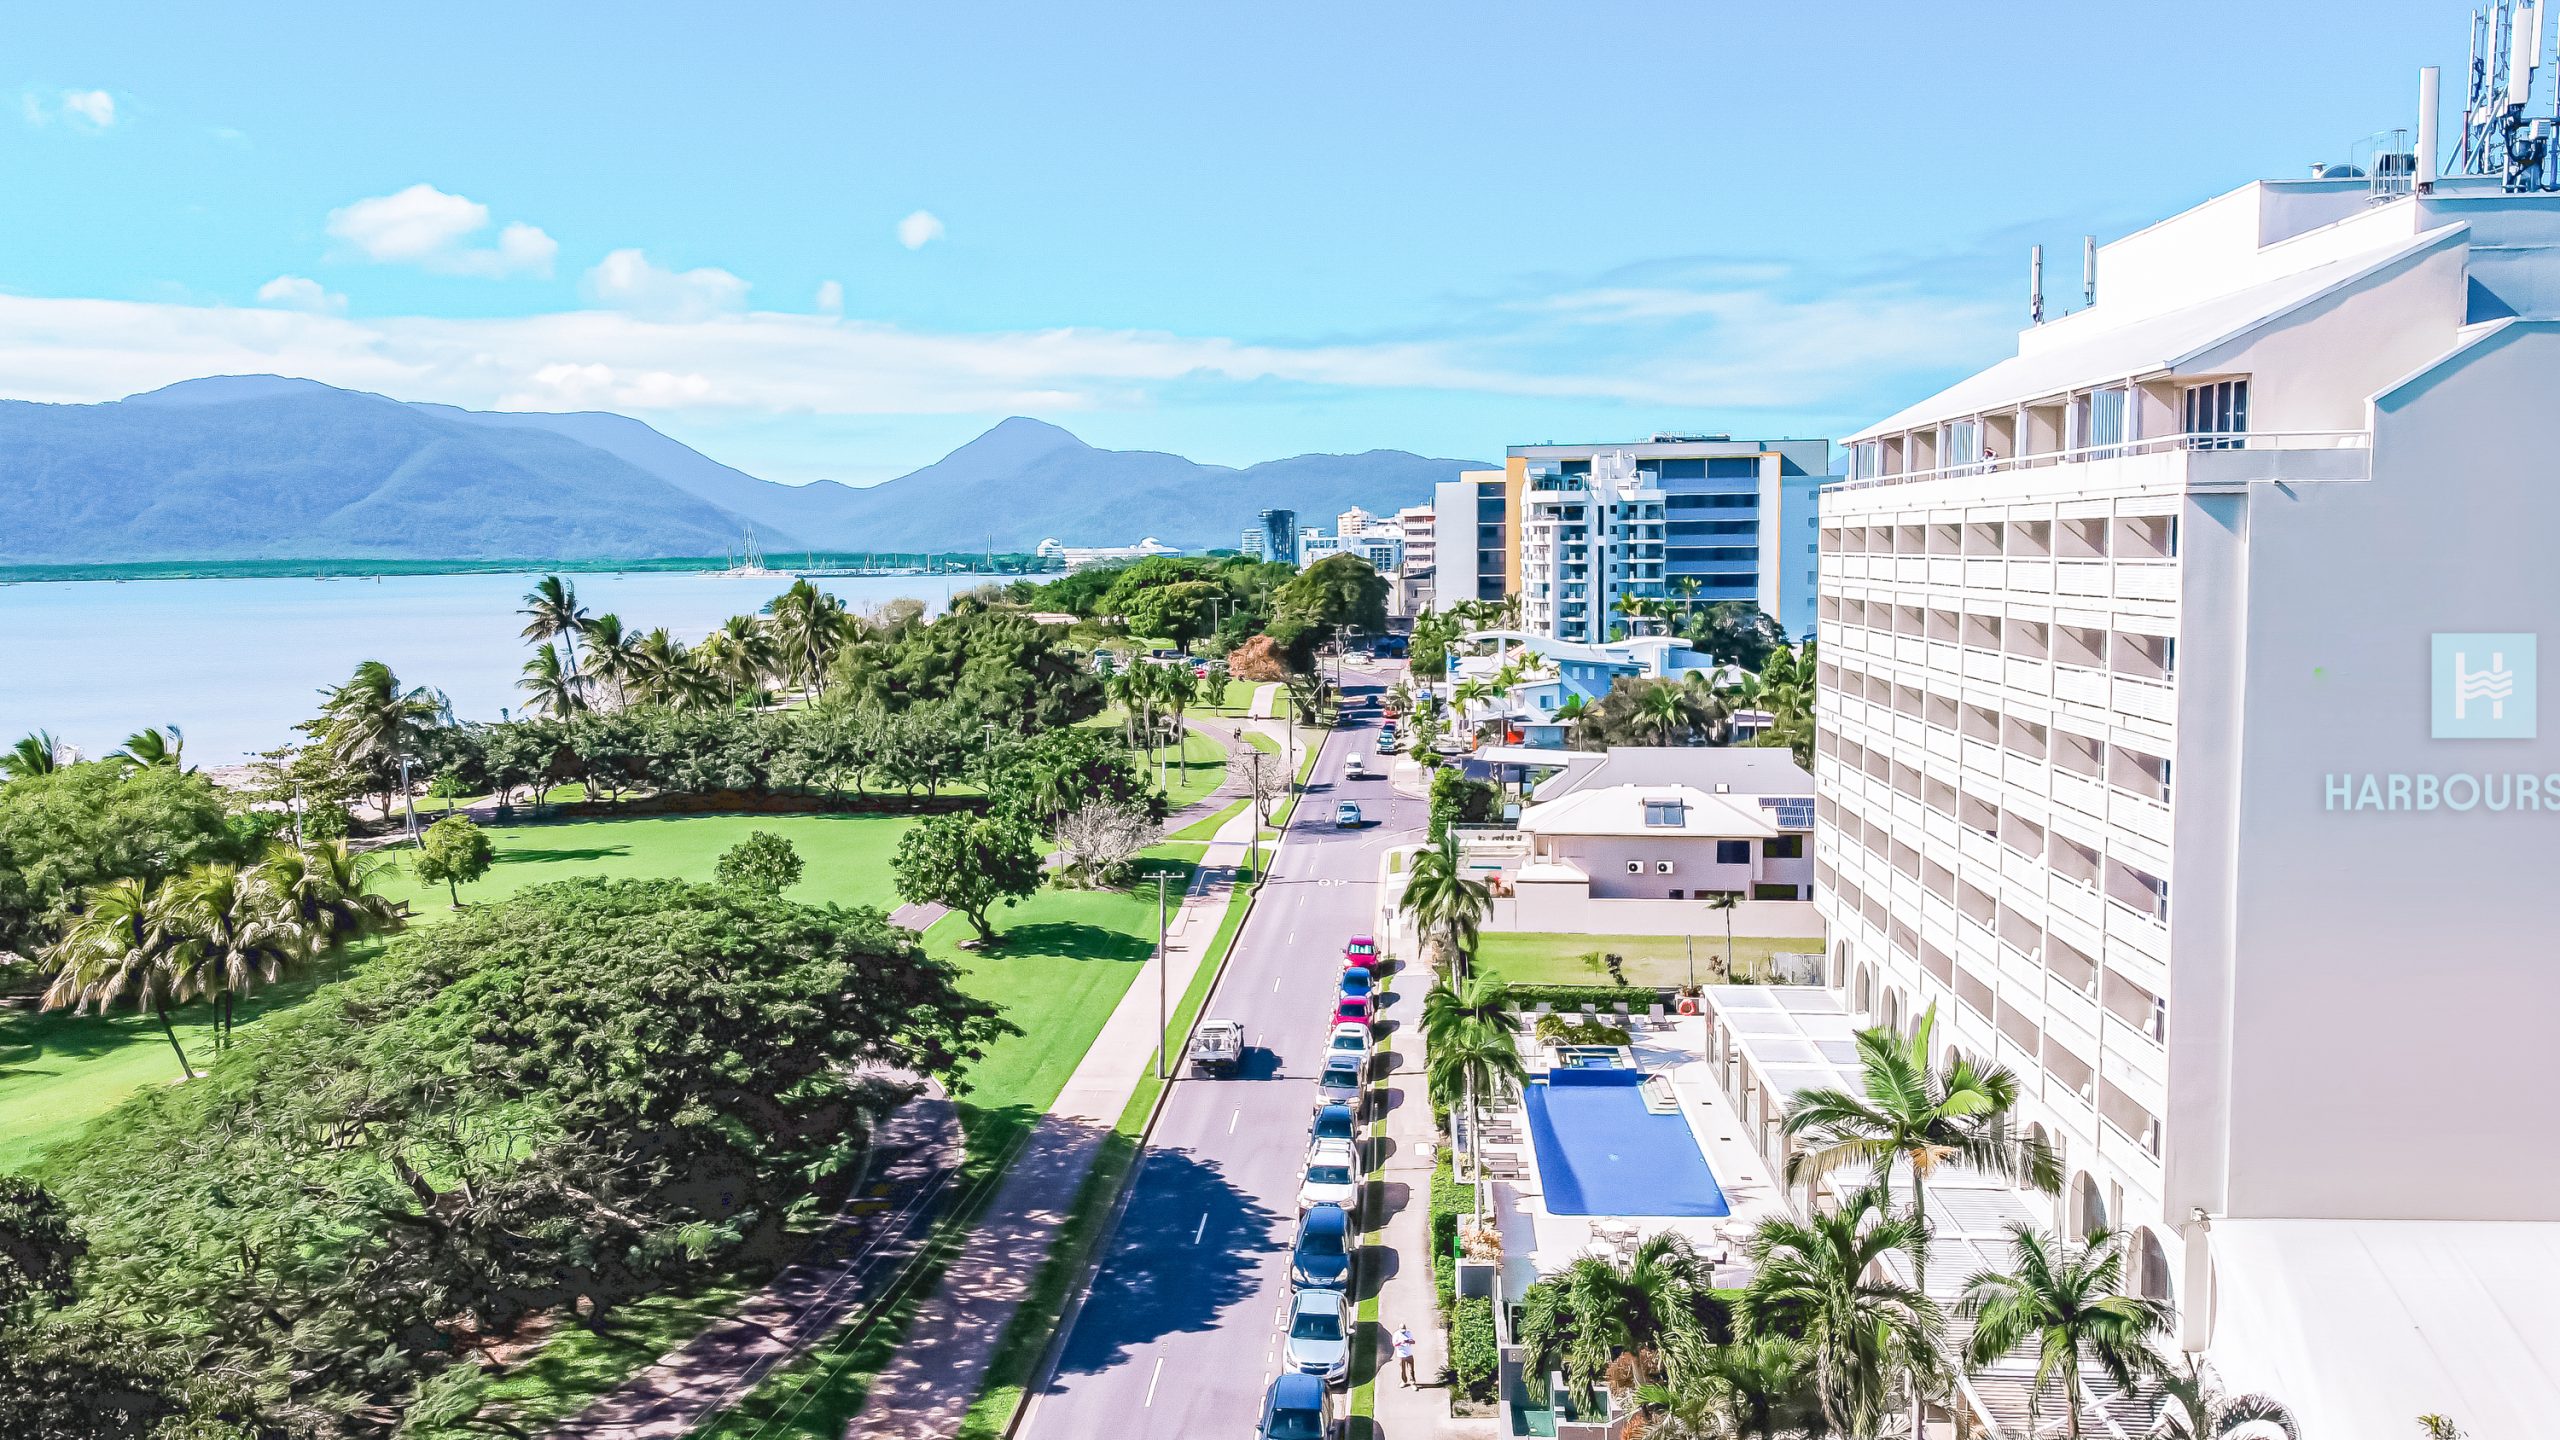 Cairns Harbourside Hotel launches new tropically themed event packages – Travel Weekly